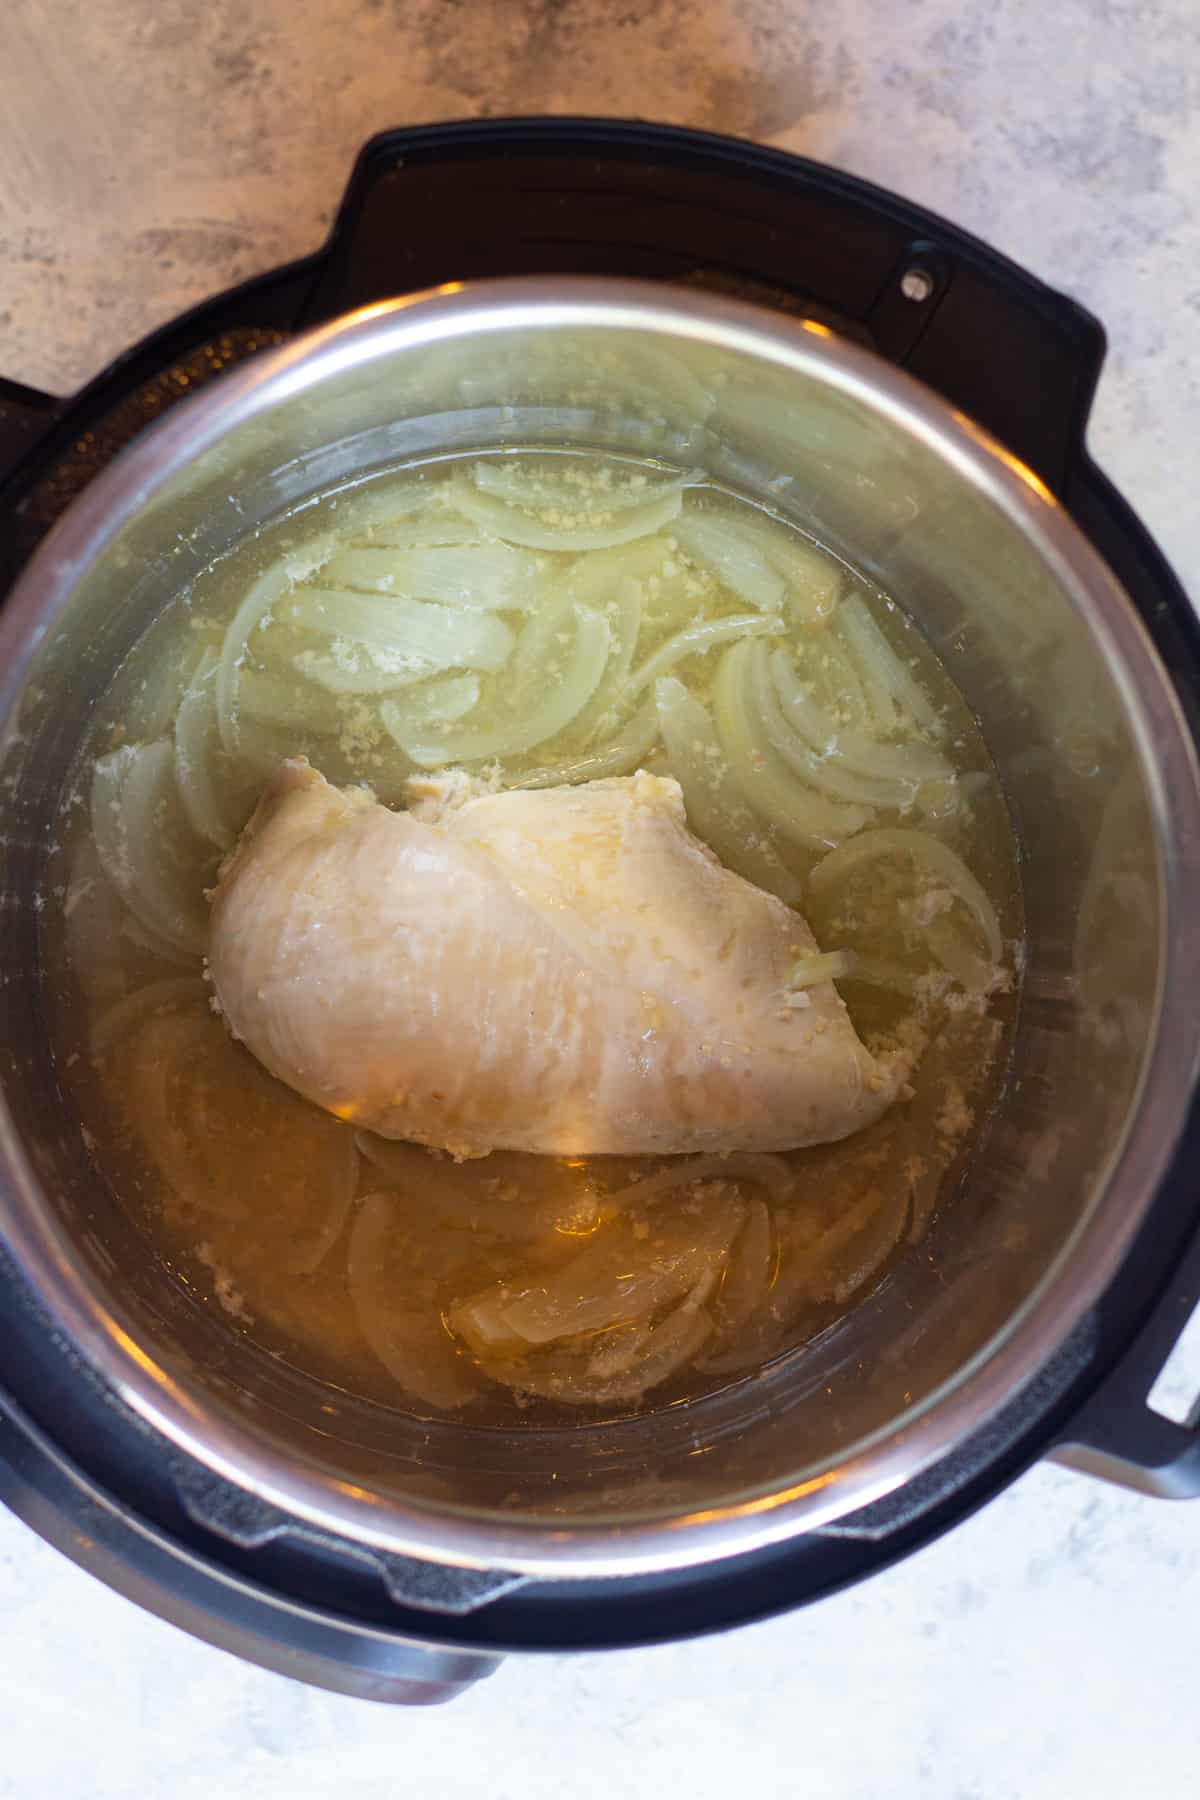 Place the chicken in instant pot and cook on high pressure for 12 minutes. 